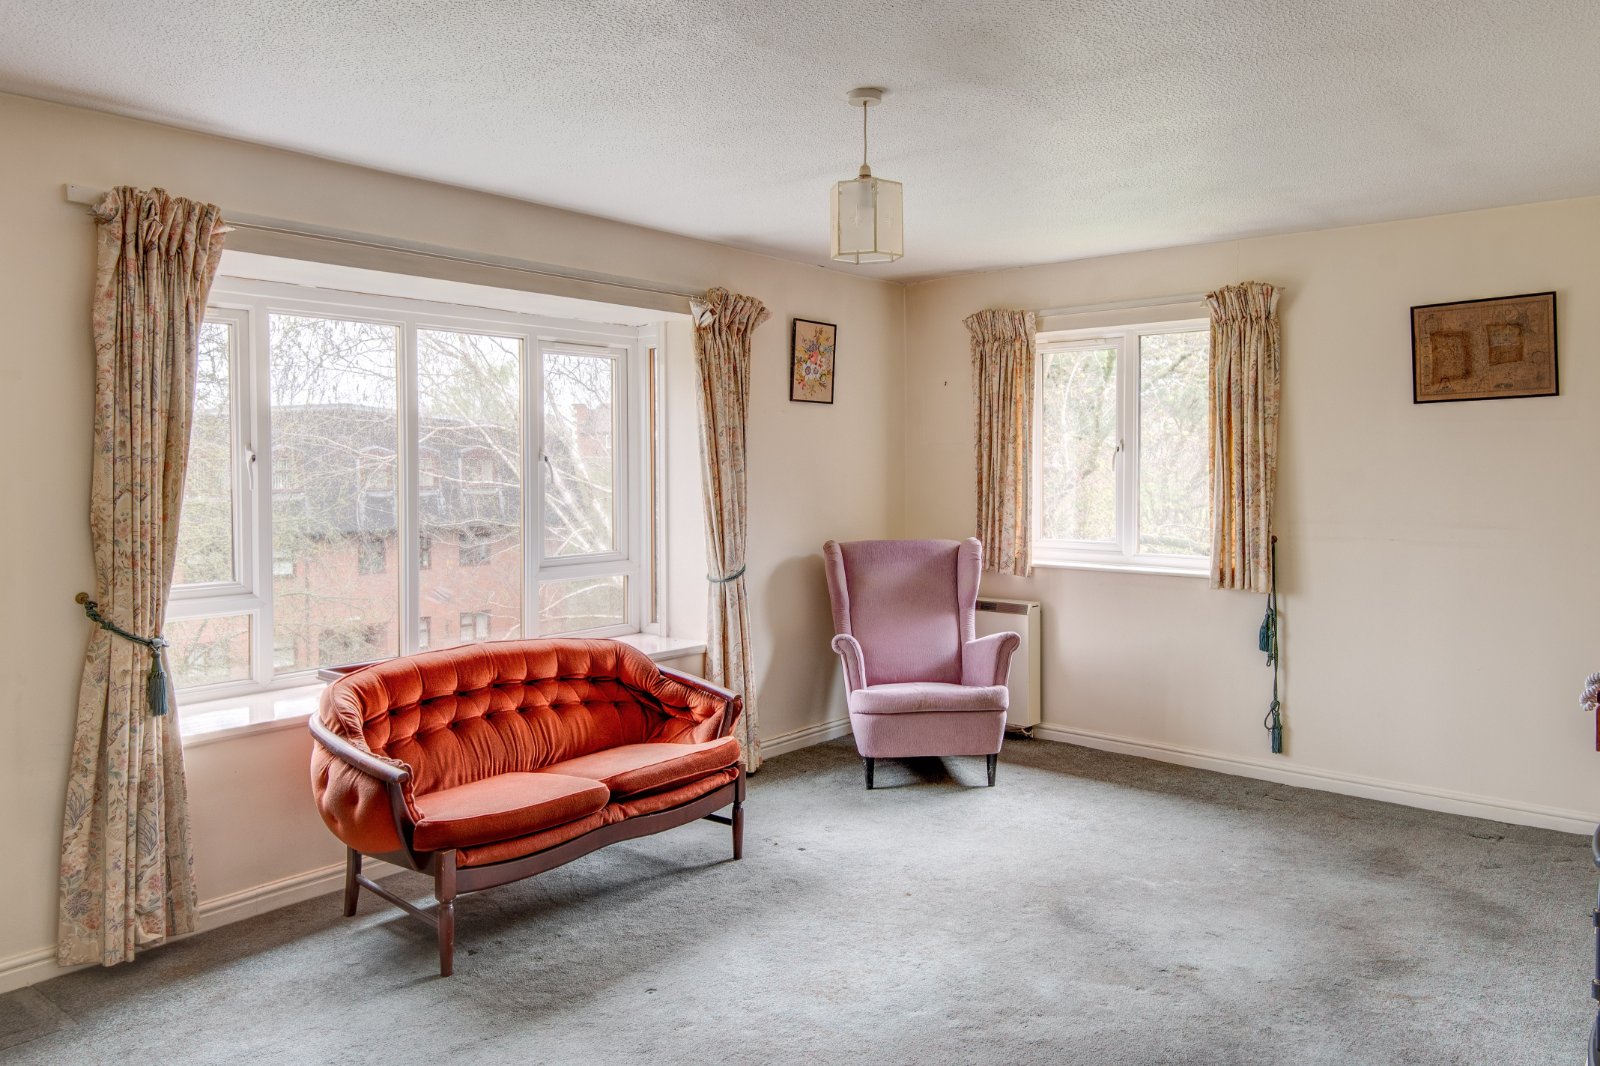 1 bed  for sale in Housman Park, Bromsgrove  - Property Image 3